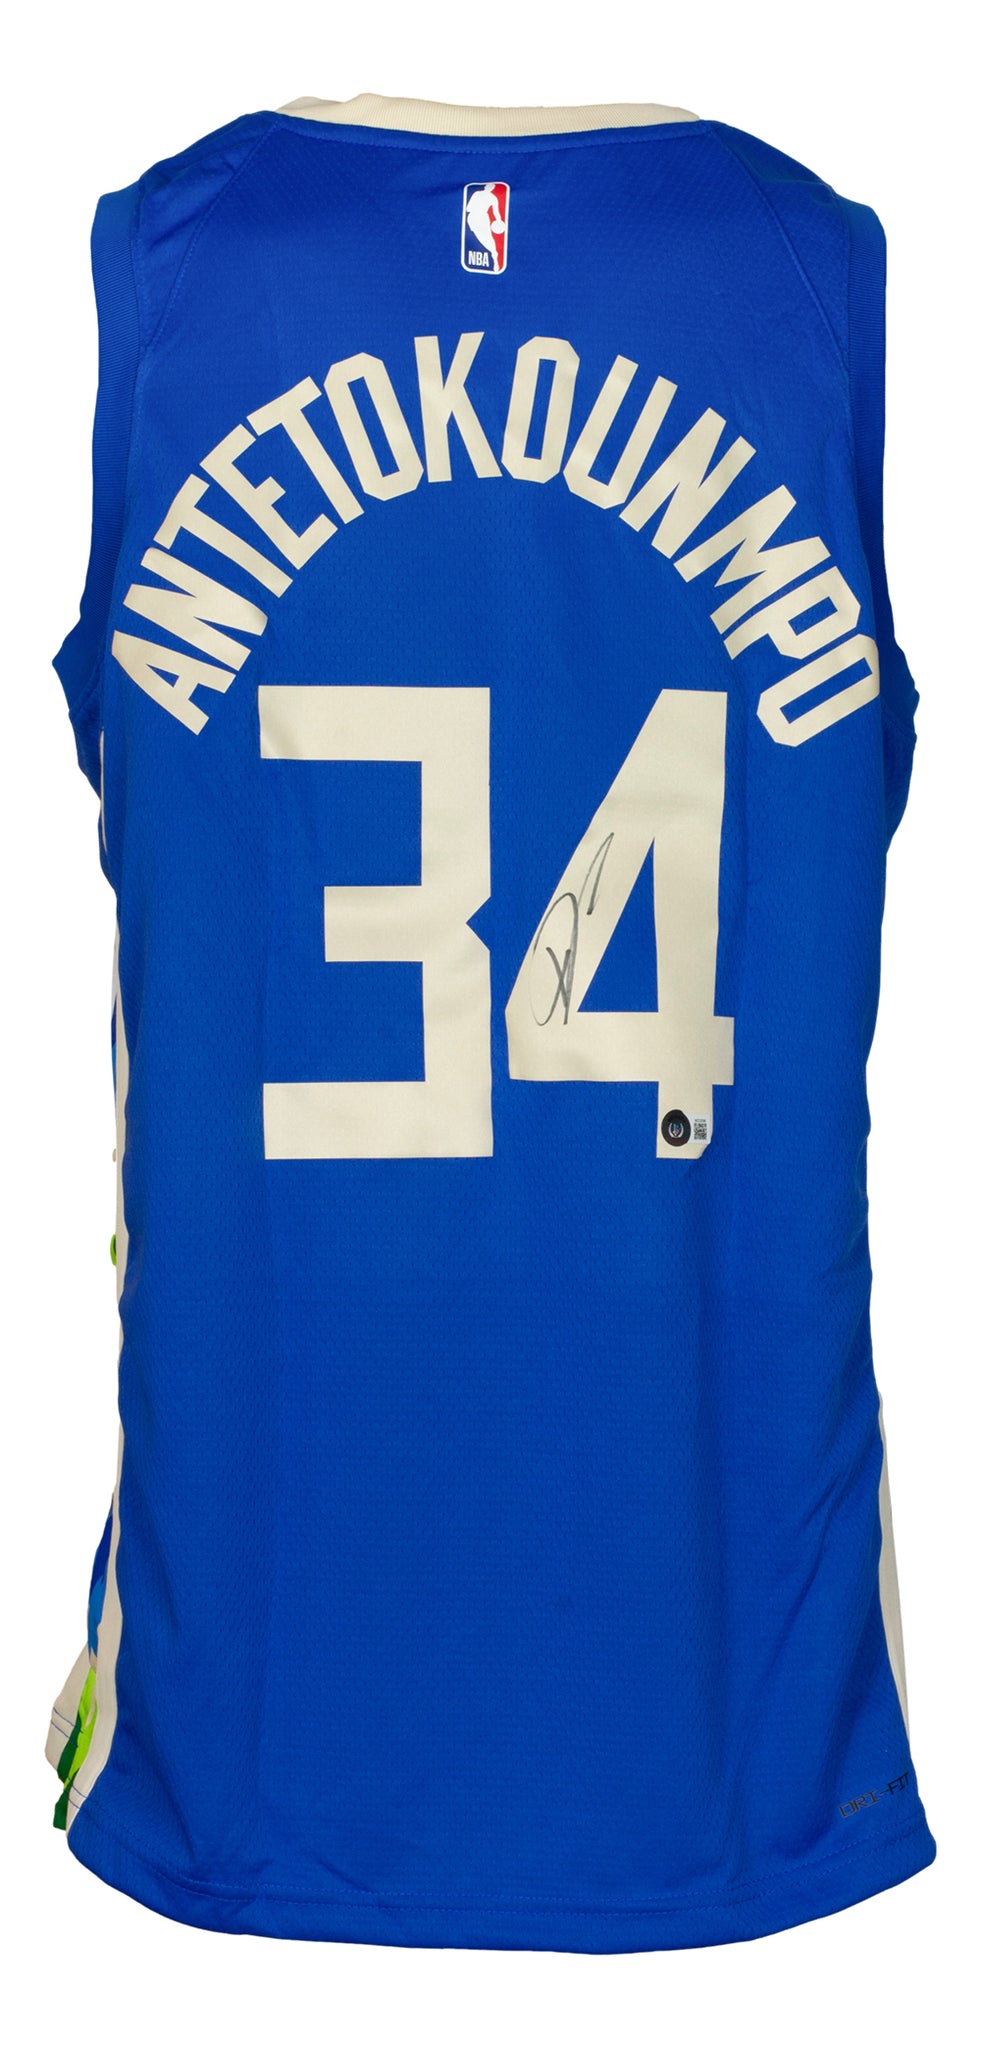 city giannis jersey